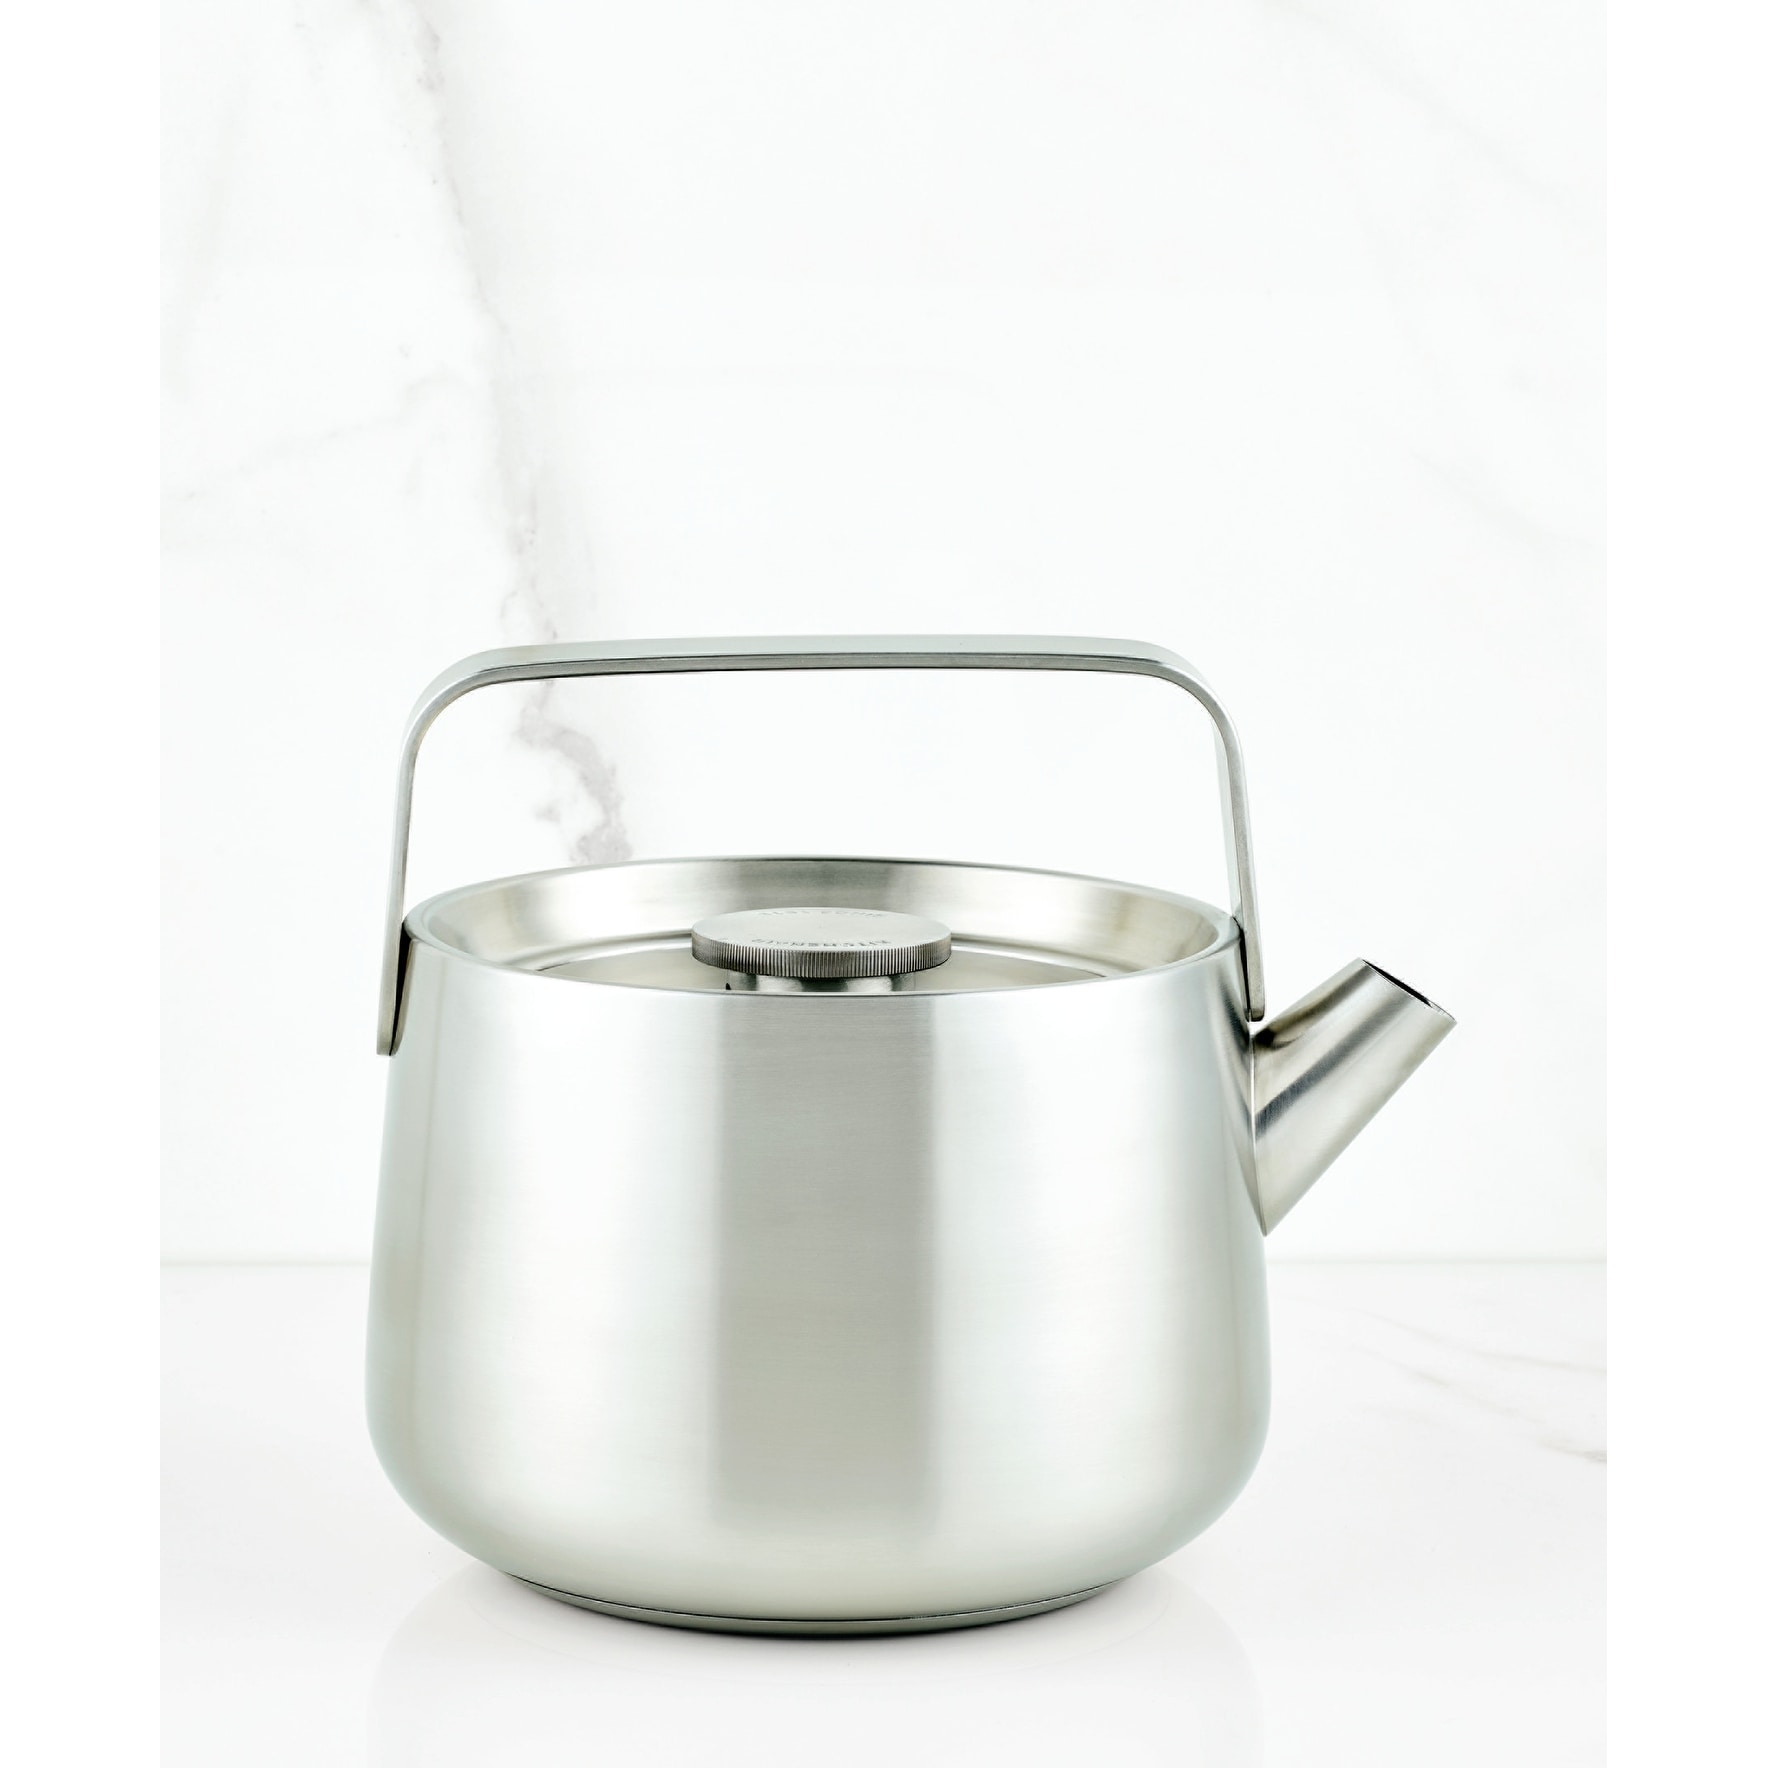 https://ak1.ostkcdn.com/images/products/is/images/direct/1636403f296ba272f0a11c540479be1bd45a32f1/KitchenAid-Stainless-Steel-Whistling-Induction-Teakettle%2C-1.9-Quart%2C-Brushed-Stainless-Steel.jpg